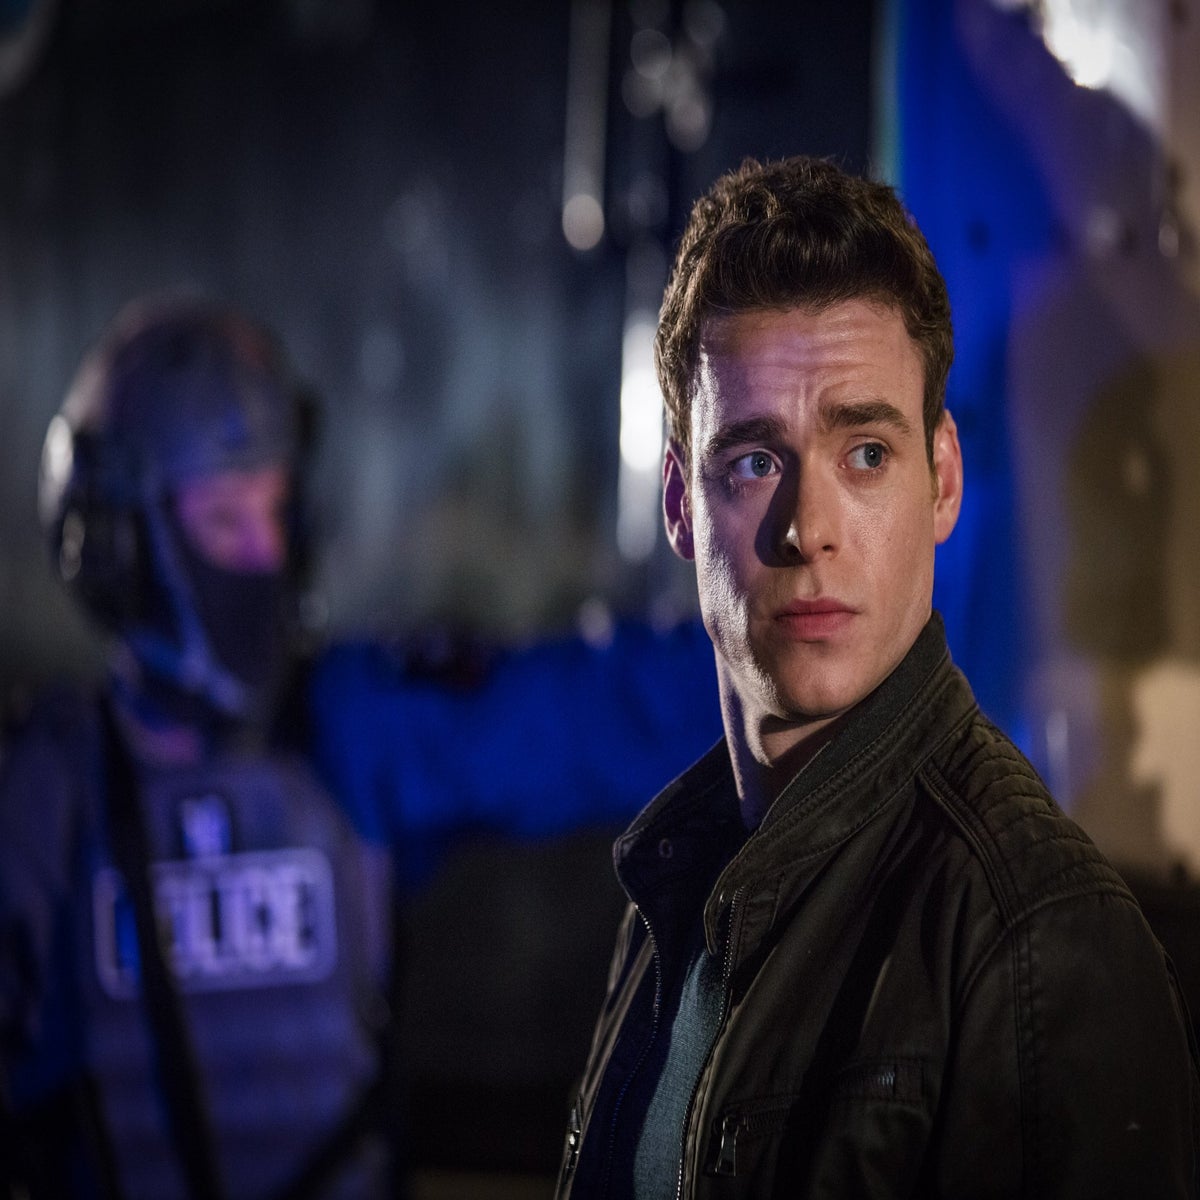 The BBC Series: Bodyguard – Fact from Fiction